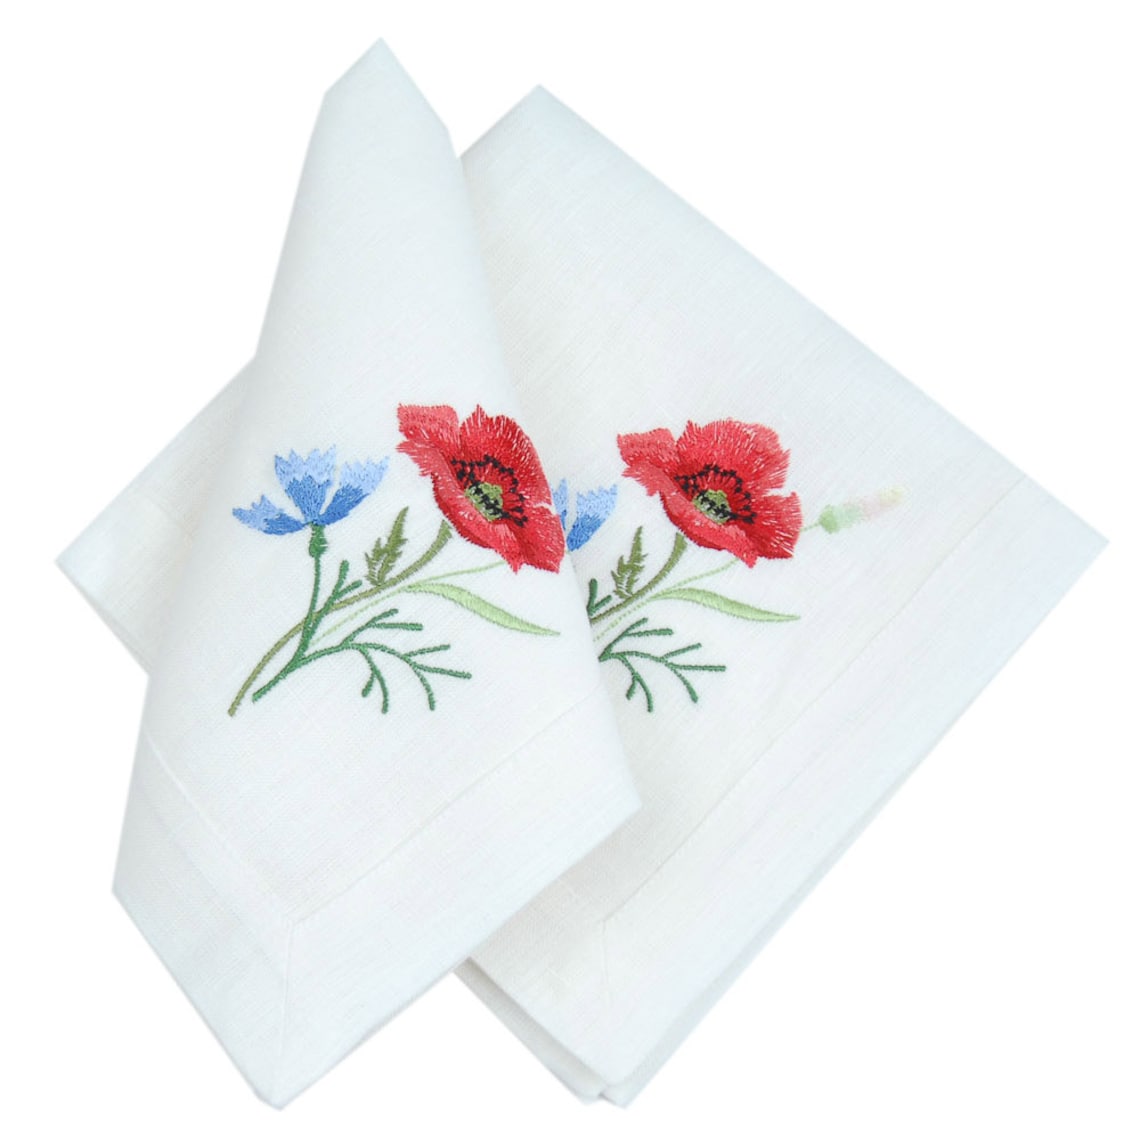 Set of Embroidered Linen Napkins. Embroidered Poppies With | Etsy